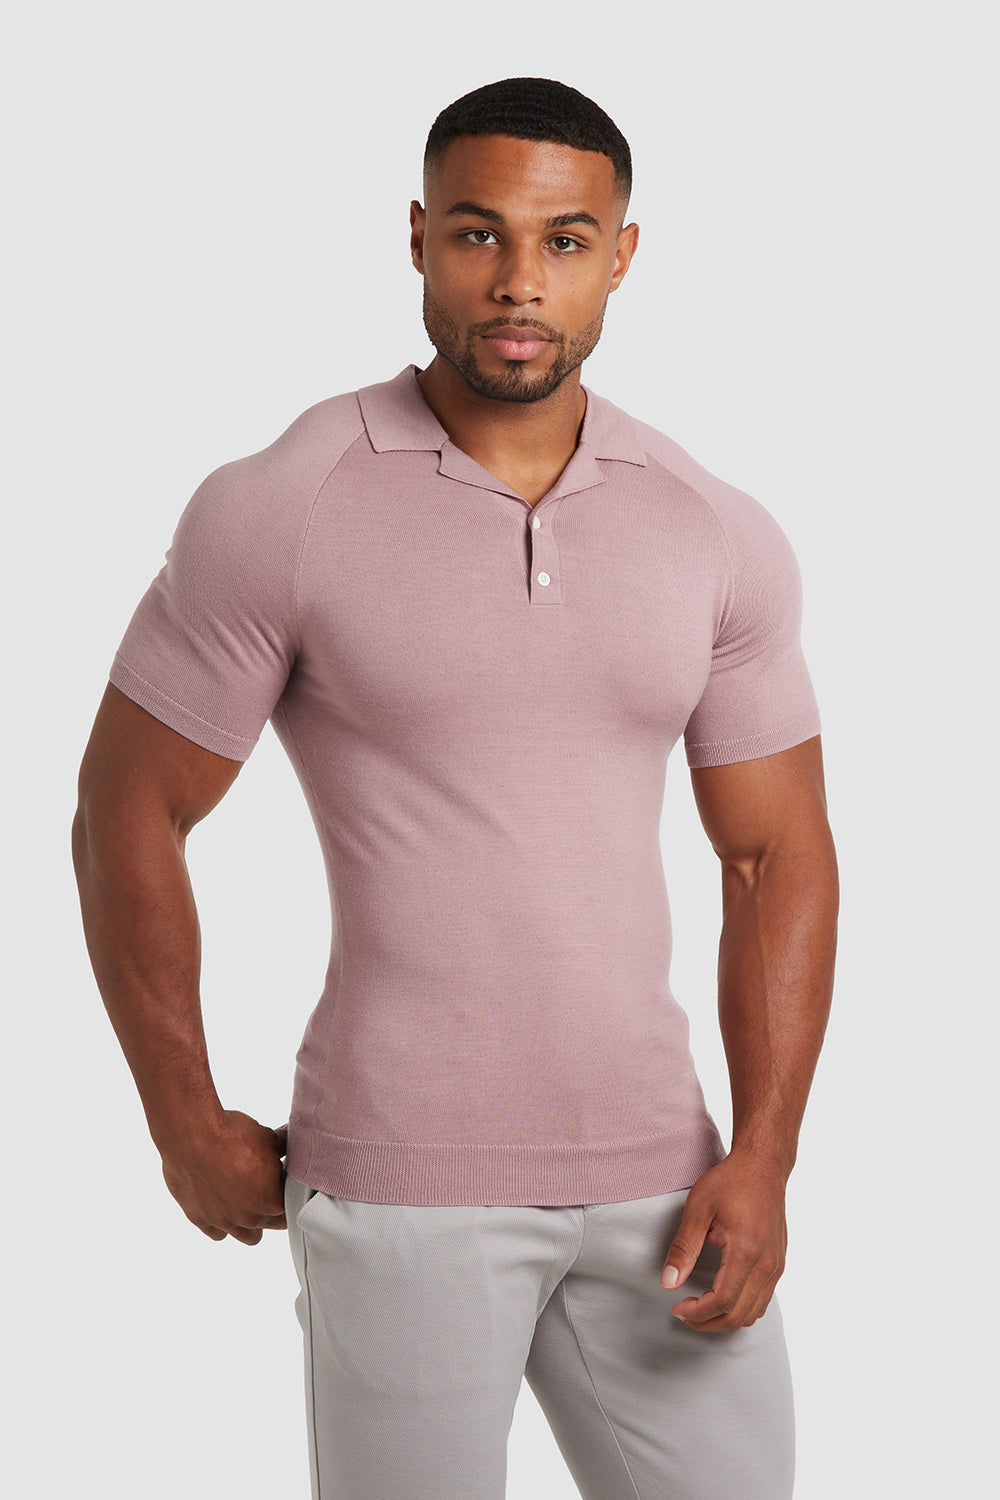 Merino Open Collar Knitted Polo in Dusty Pink - TAILORED ATHLETE - ROW